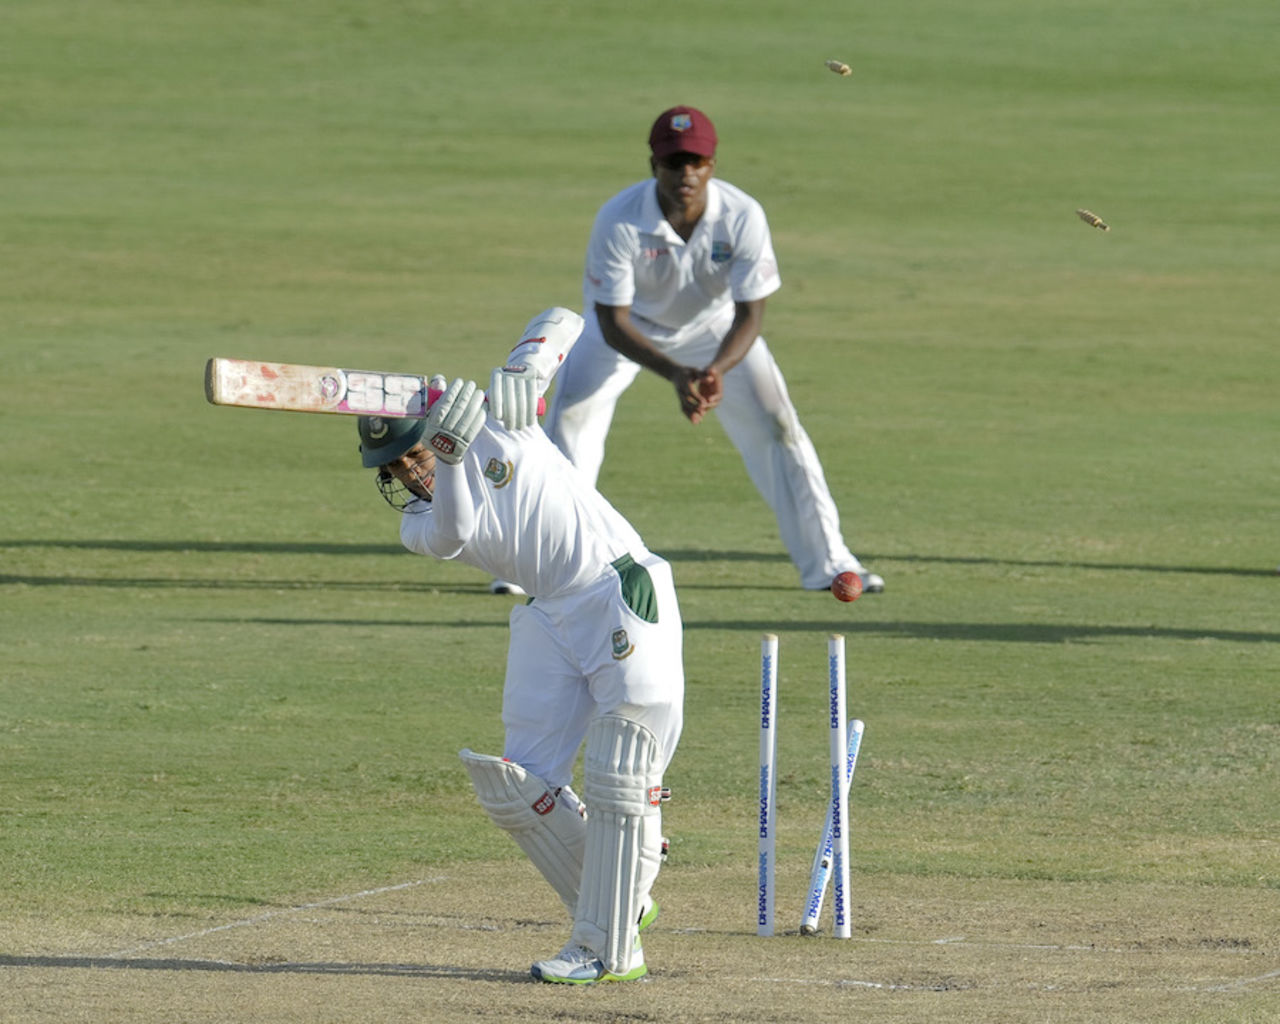 Mushfiqur Rahim became a target of Jerome Taylor's reverse swing, West Indies v Bangladesh, 2nd Test, St. Lucia, 4th day, September 16, 2014